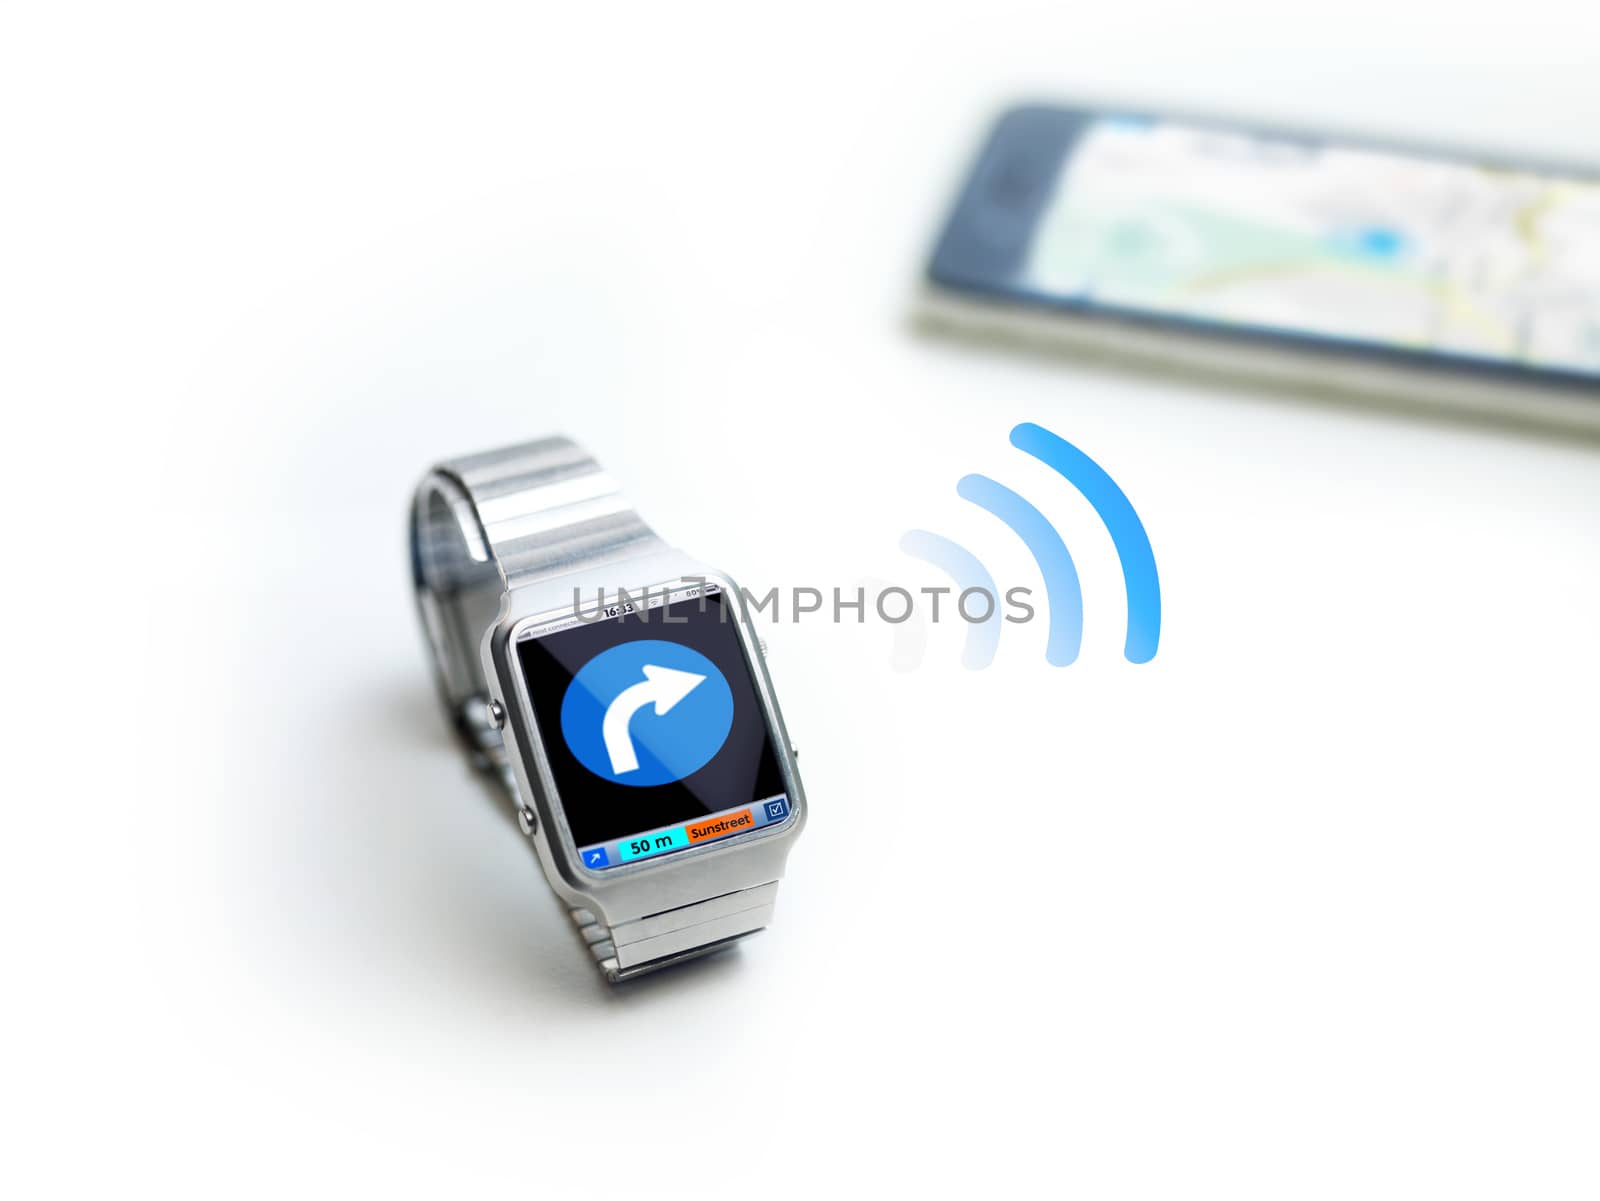 concept of data watch, so called smartwatch or iwatch. connects via bluetooth to smartphone